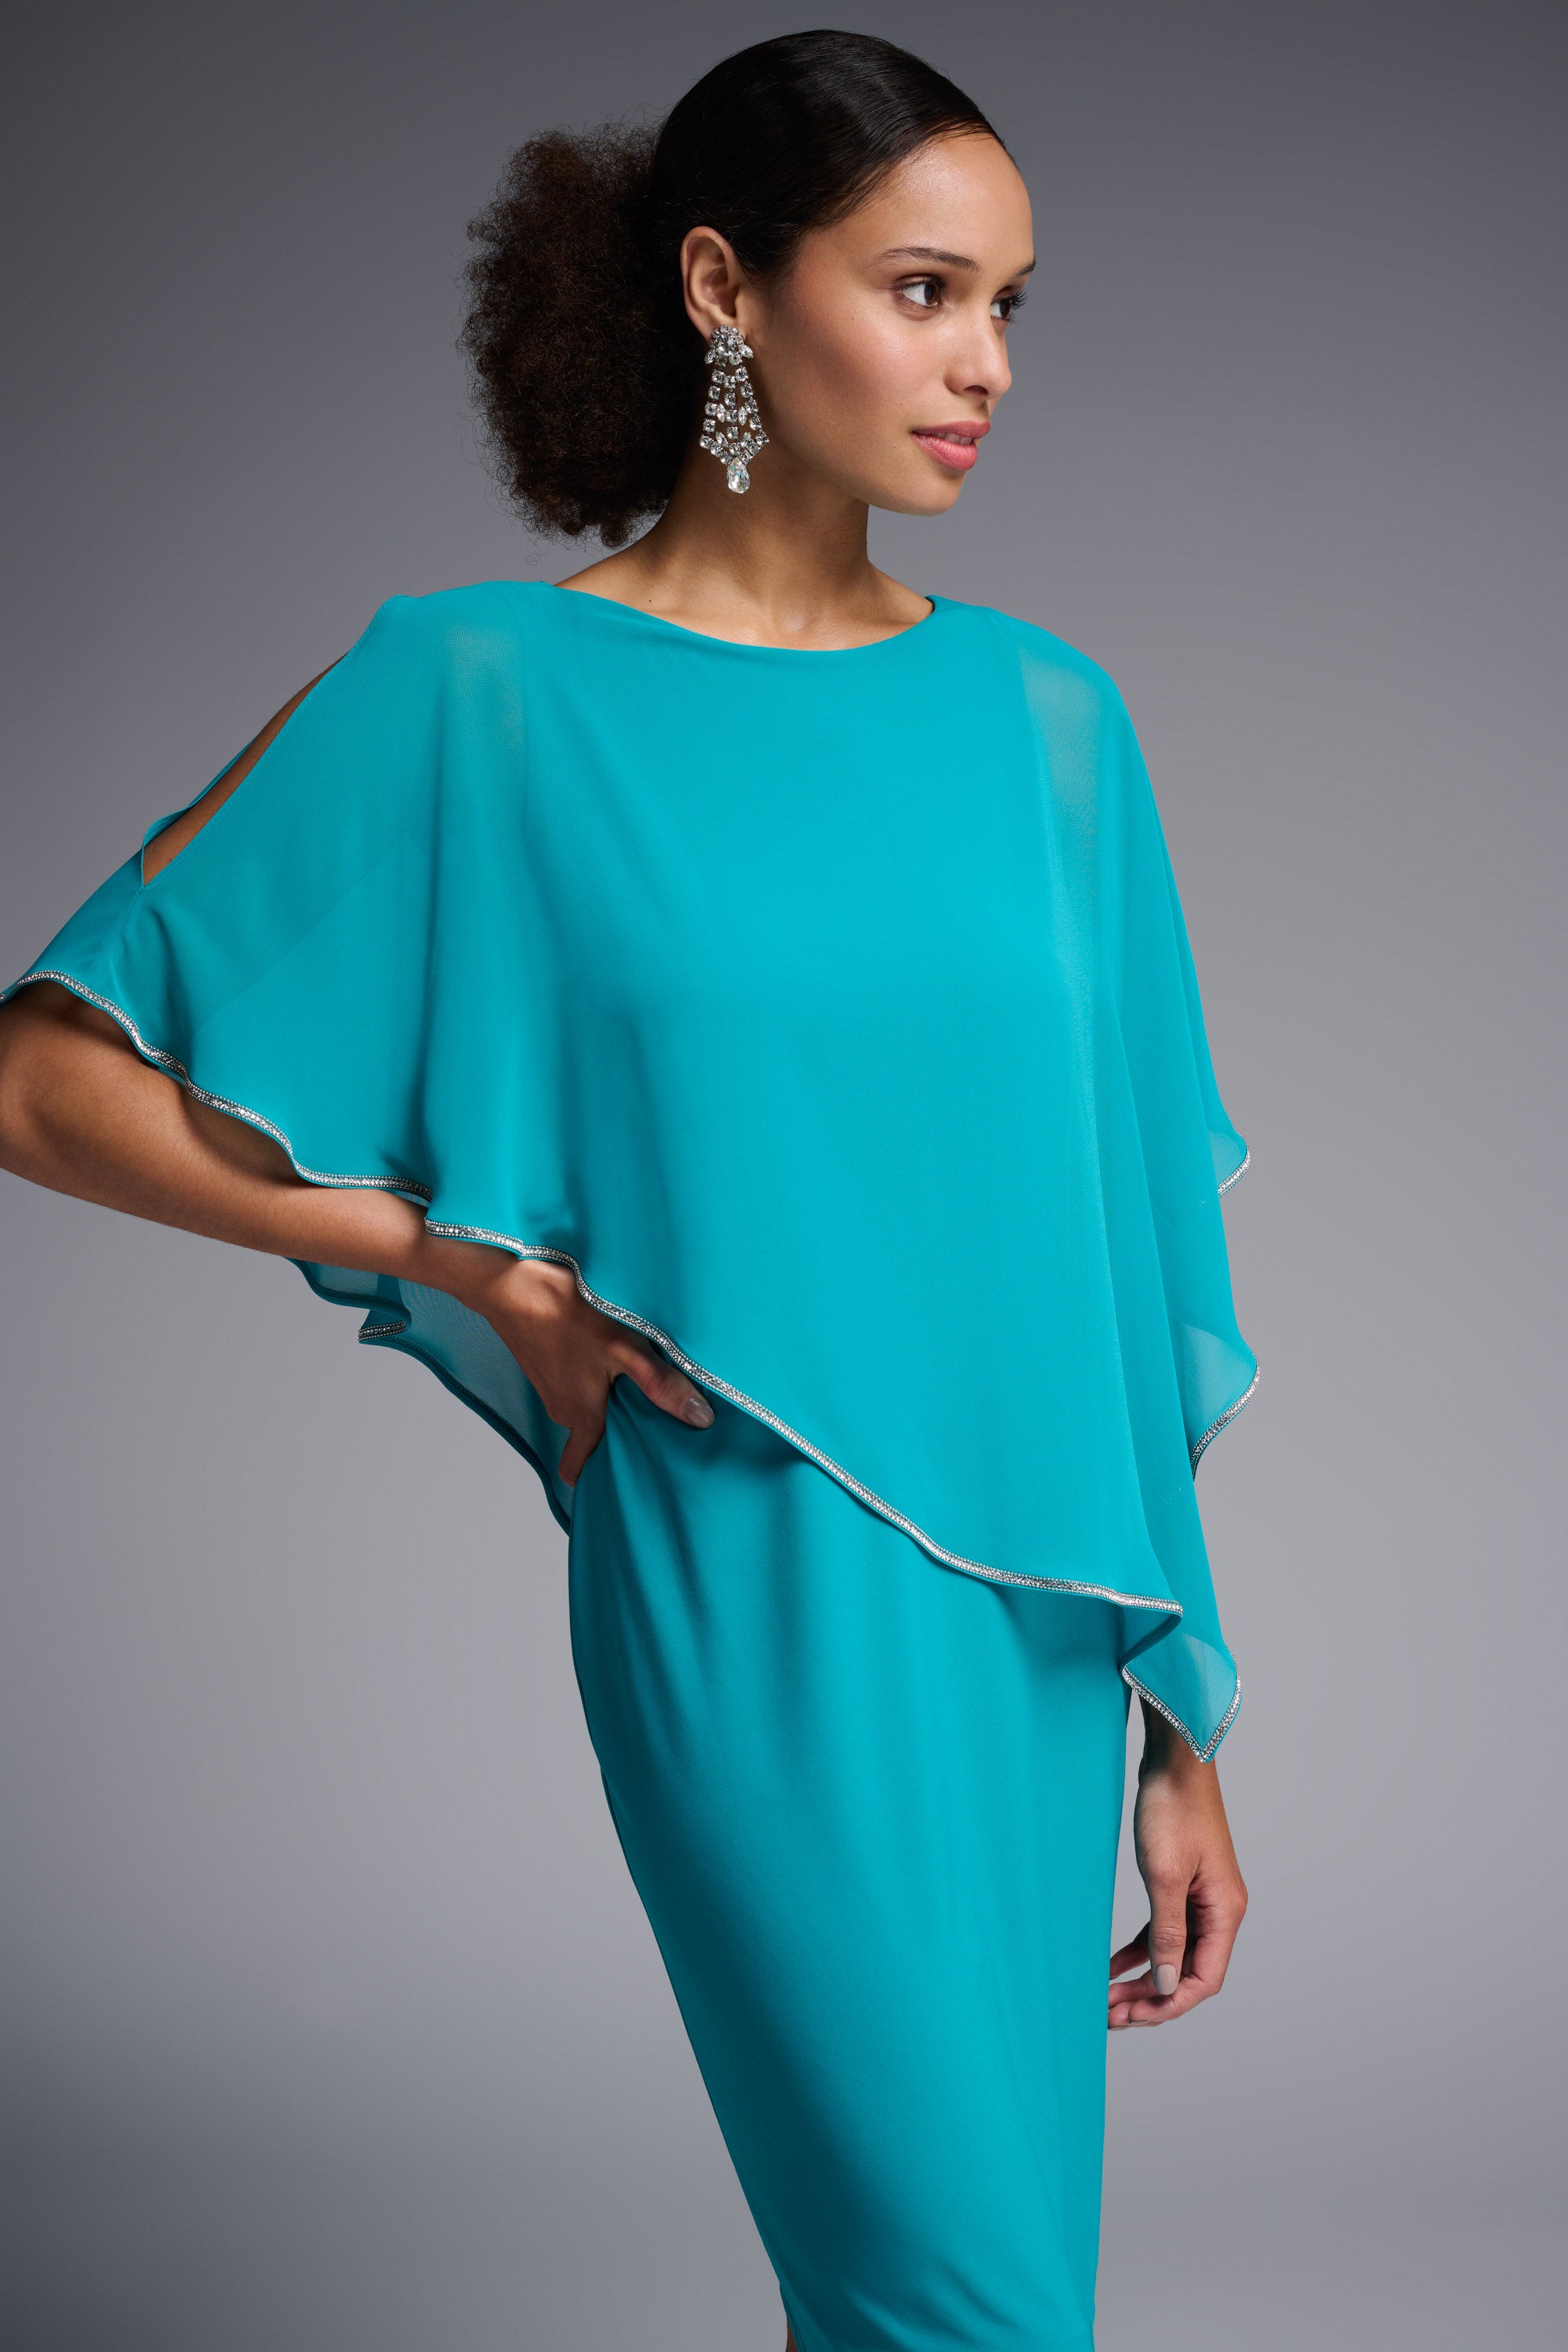 Layered Dress With Cape Overlay in Ocean Blue - After Hours Boutique